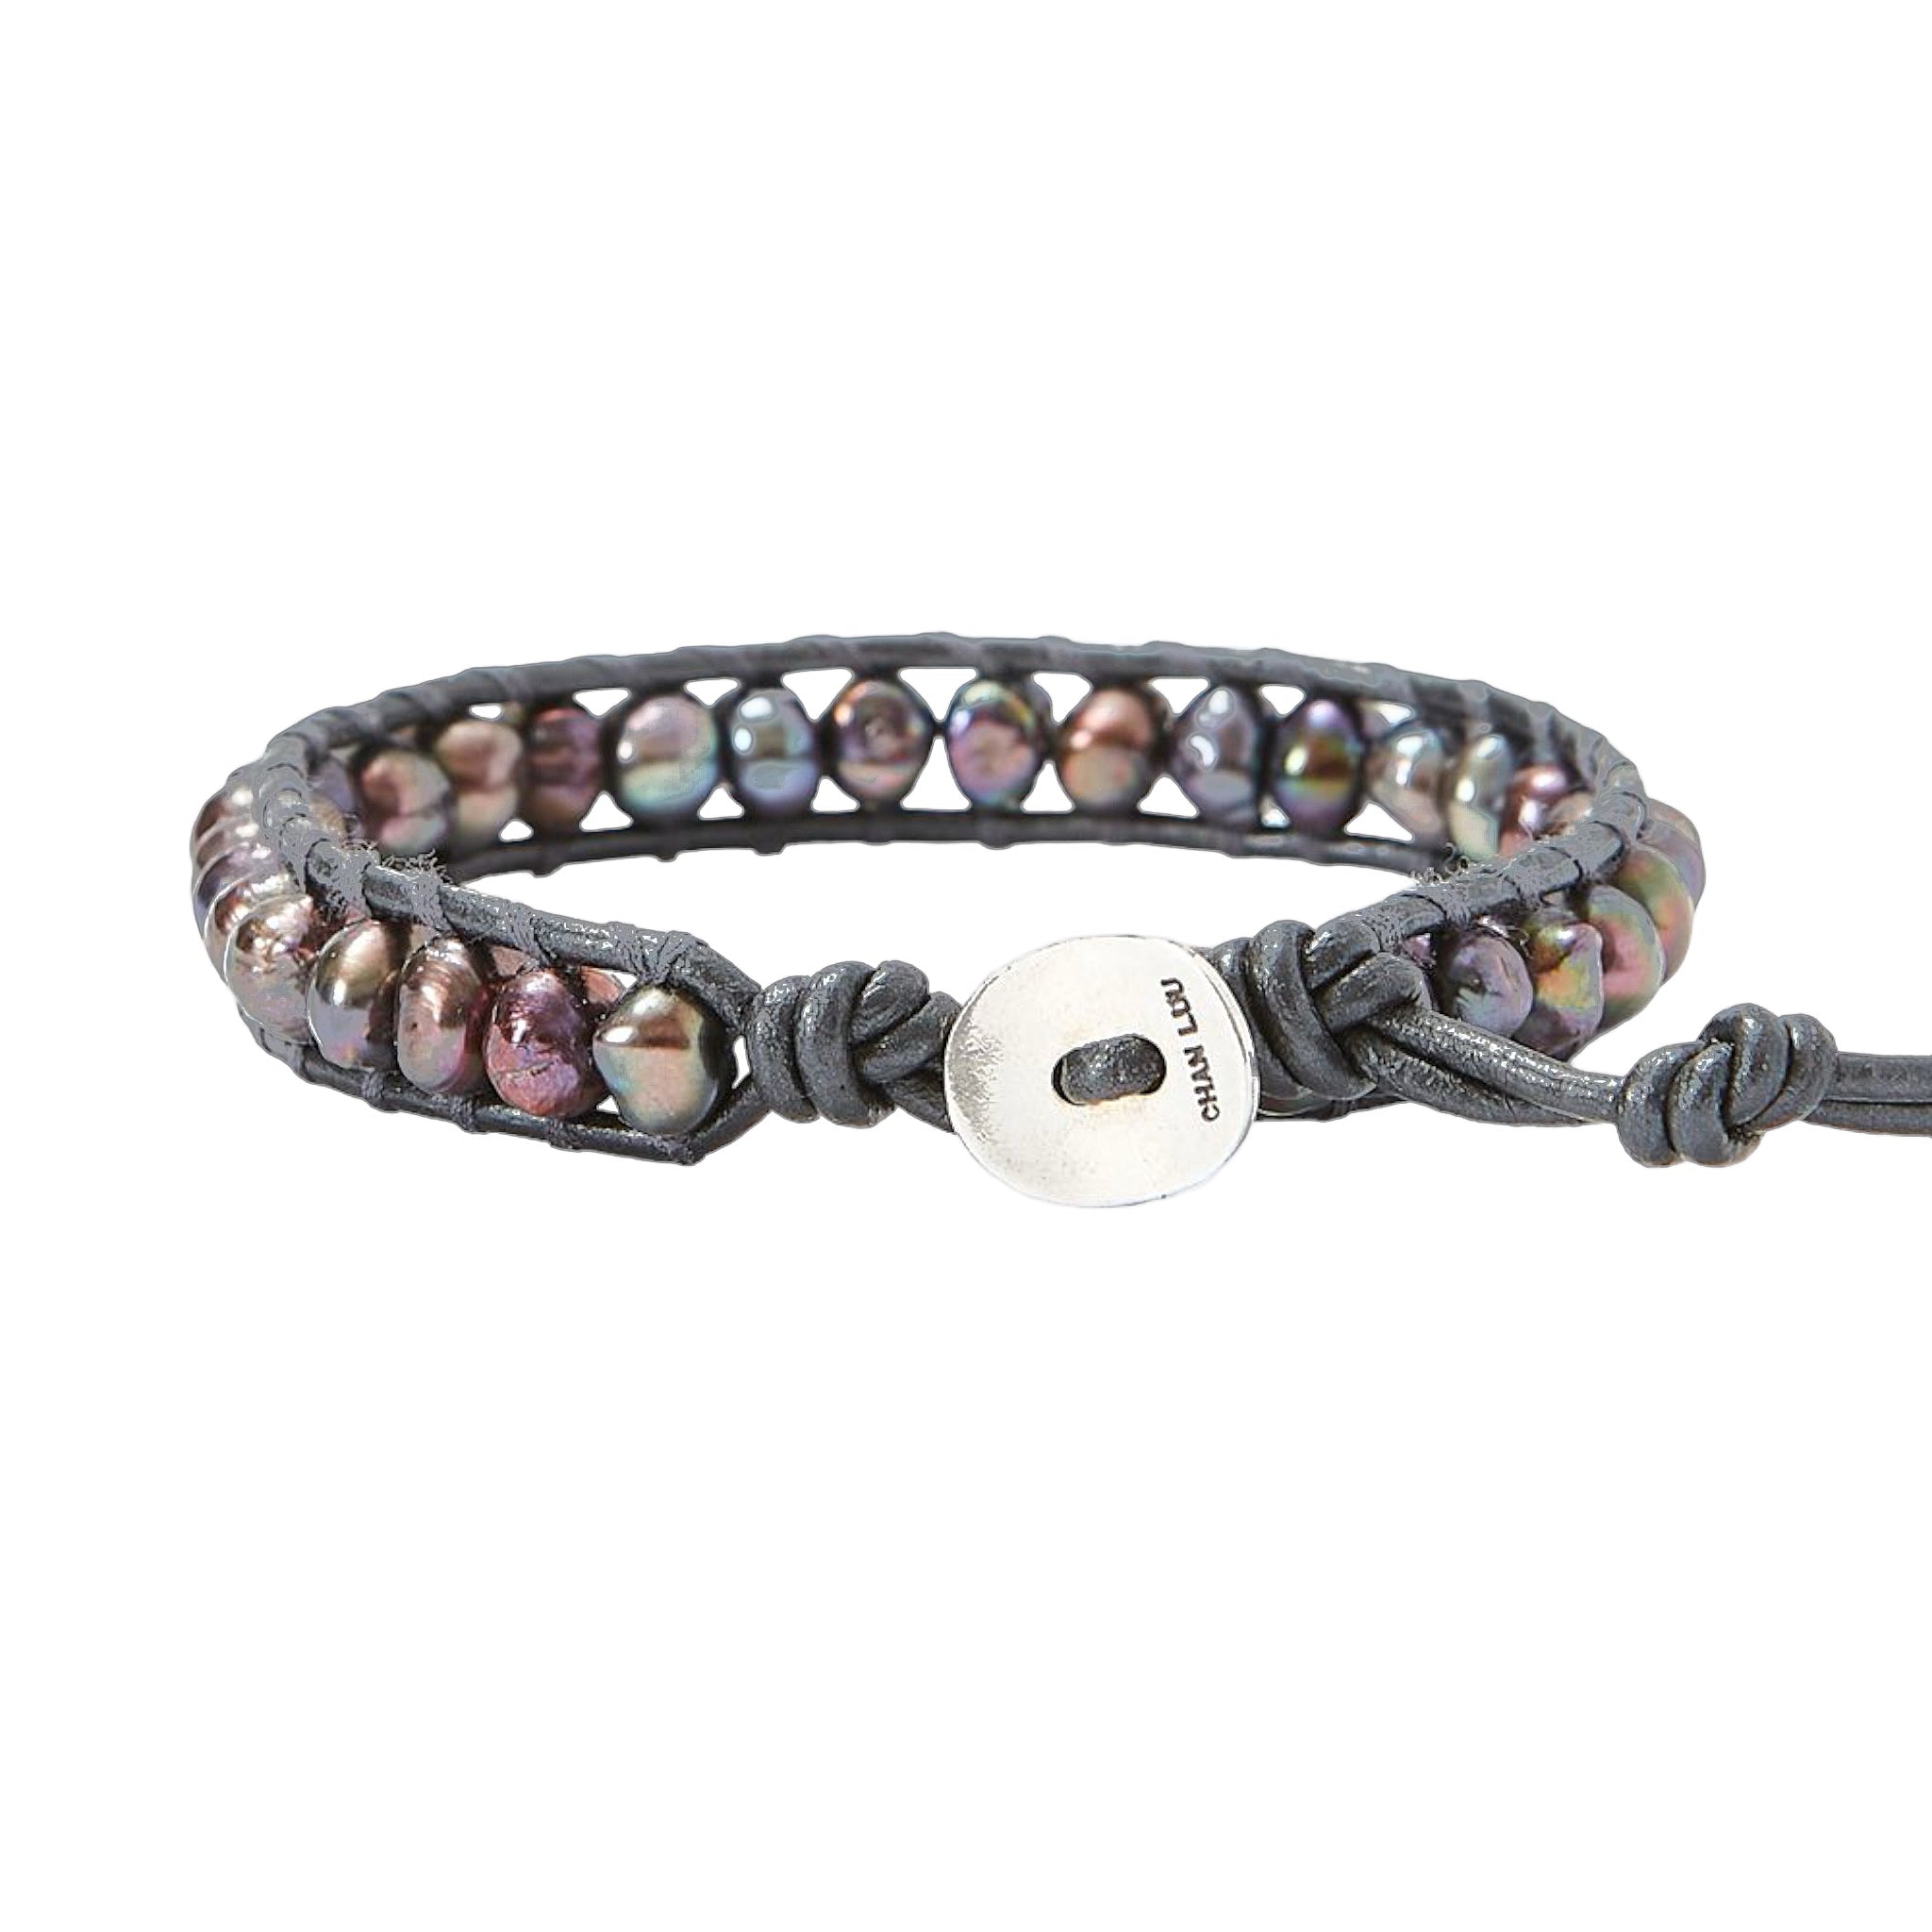 Chan Luu Single Wrap Bracelet with Peacock Pearl and Silver on Gunmetal Leather